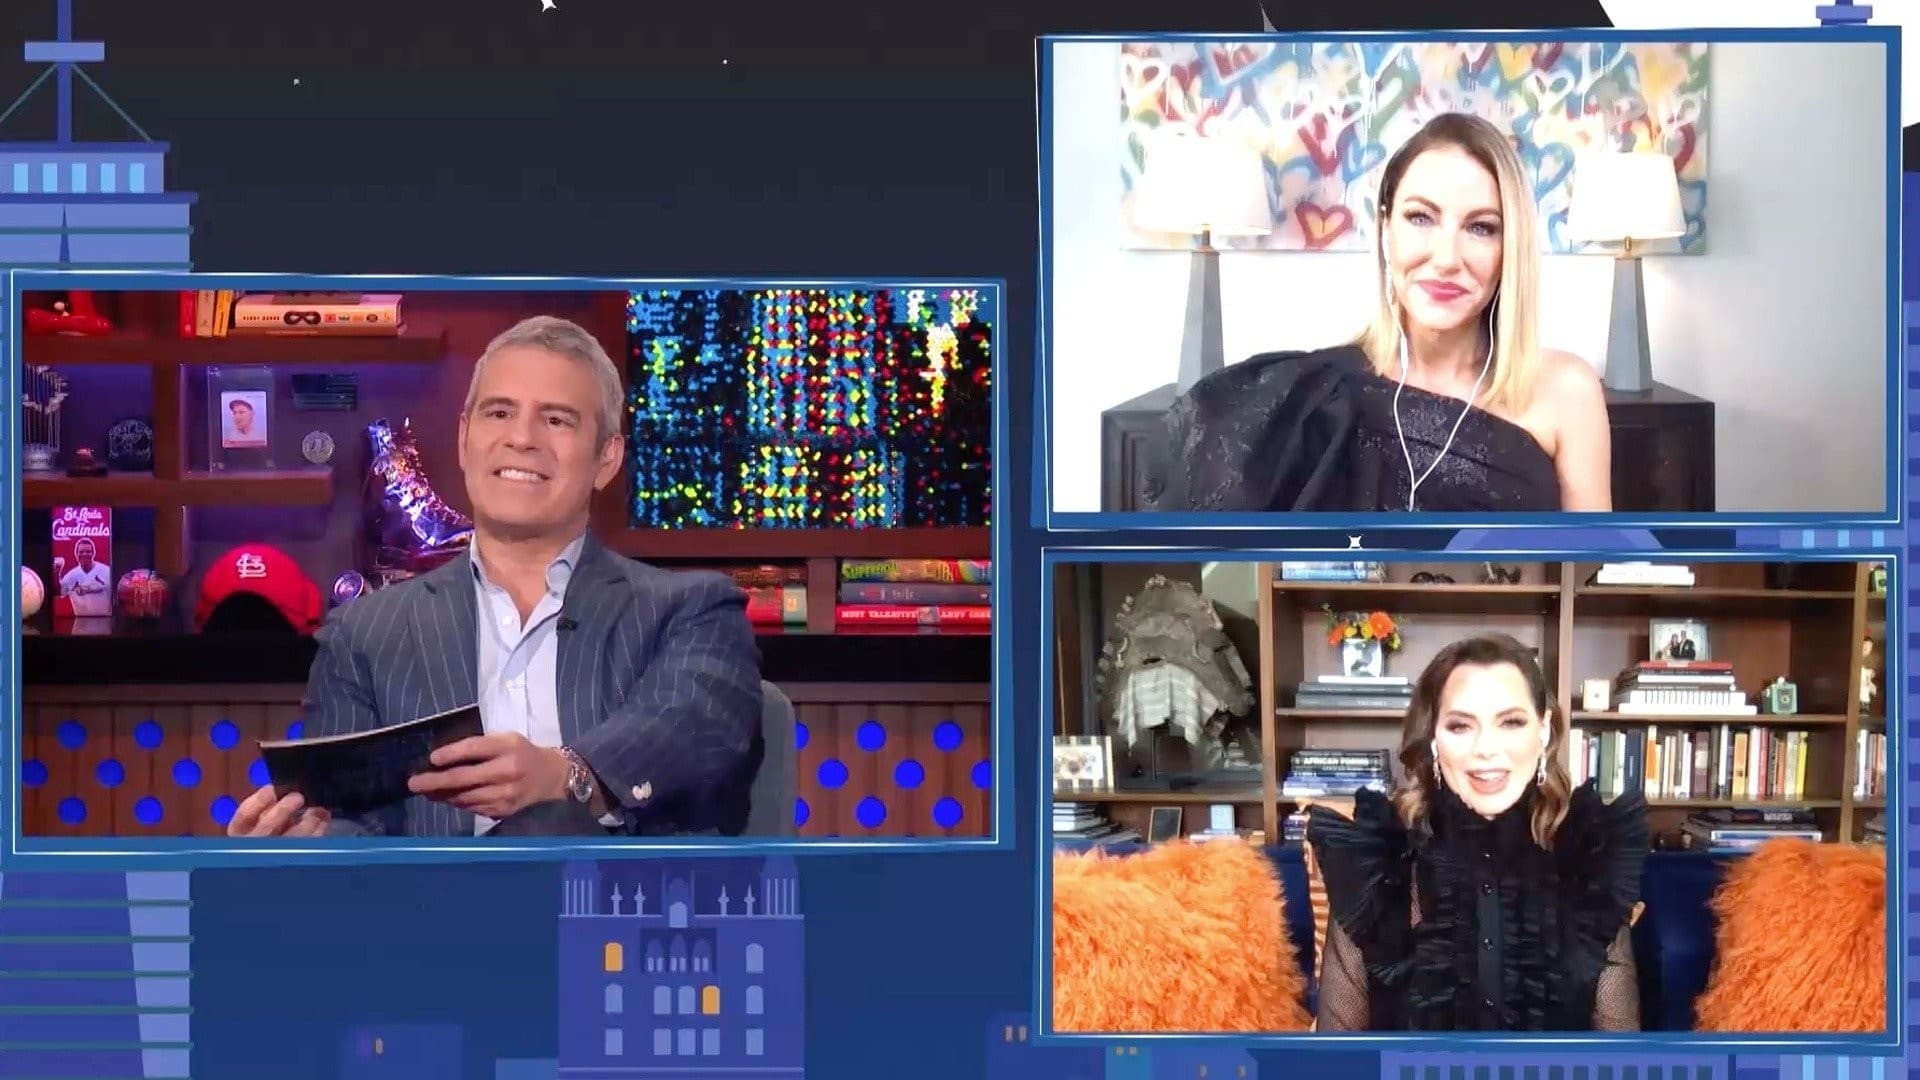 Watch What Happens Live with Andy Cohen Staffel 18 :Folge 76 